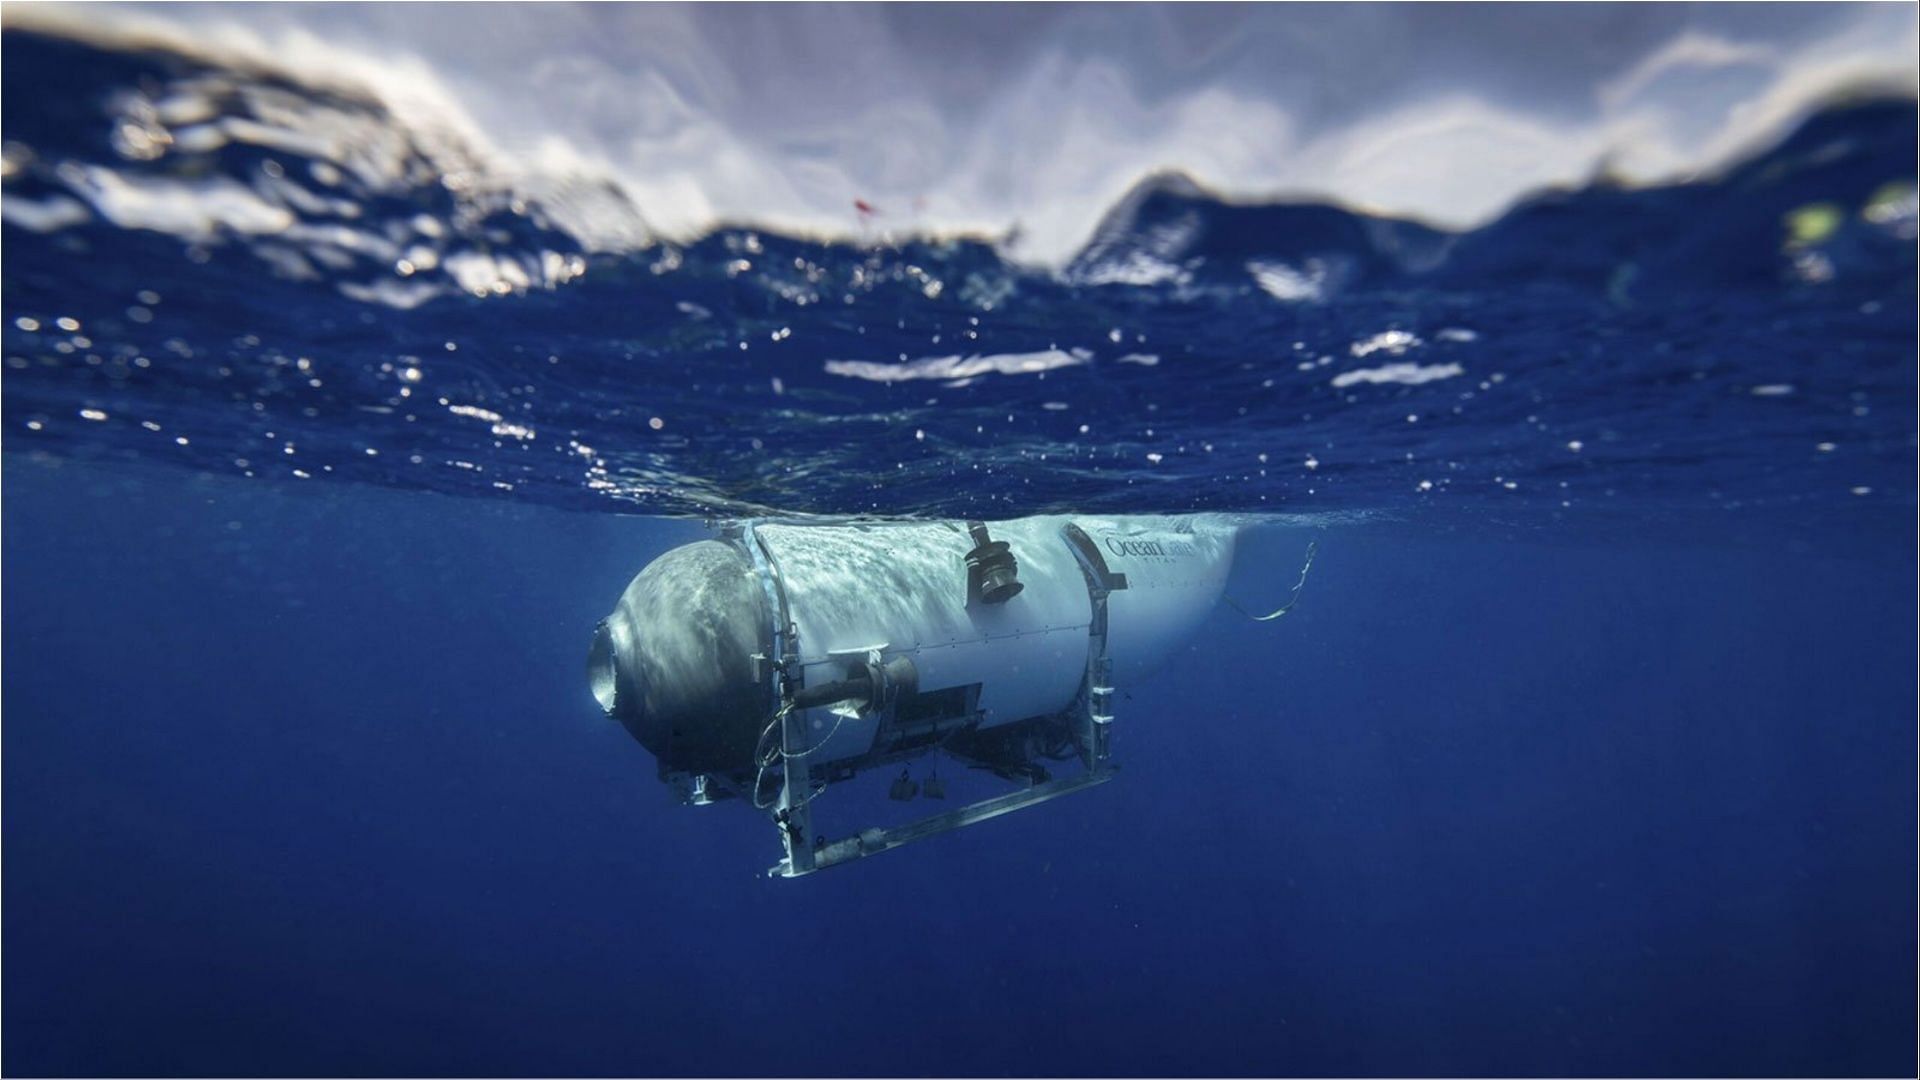 Titan submersible had five people on board when it went missing (Image via WFLAJosh/Twitter)